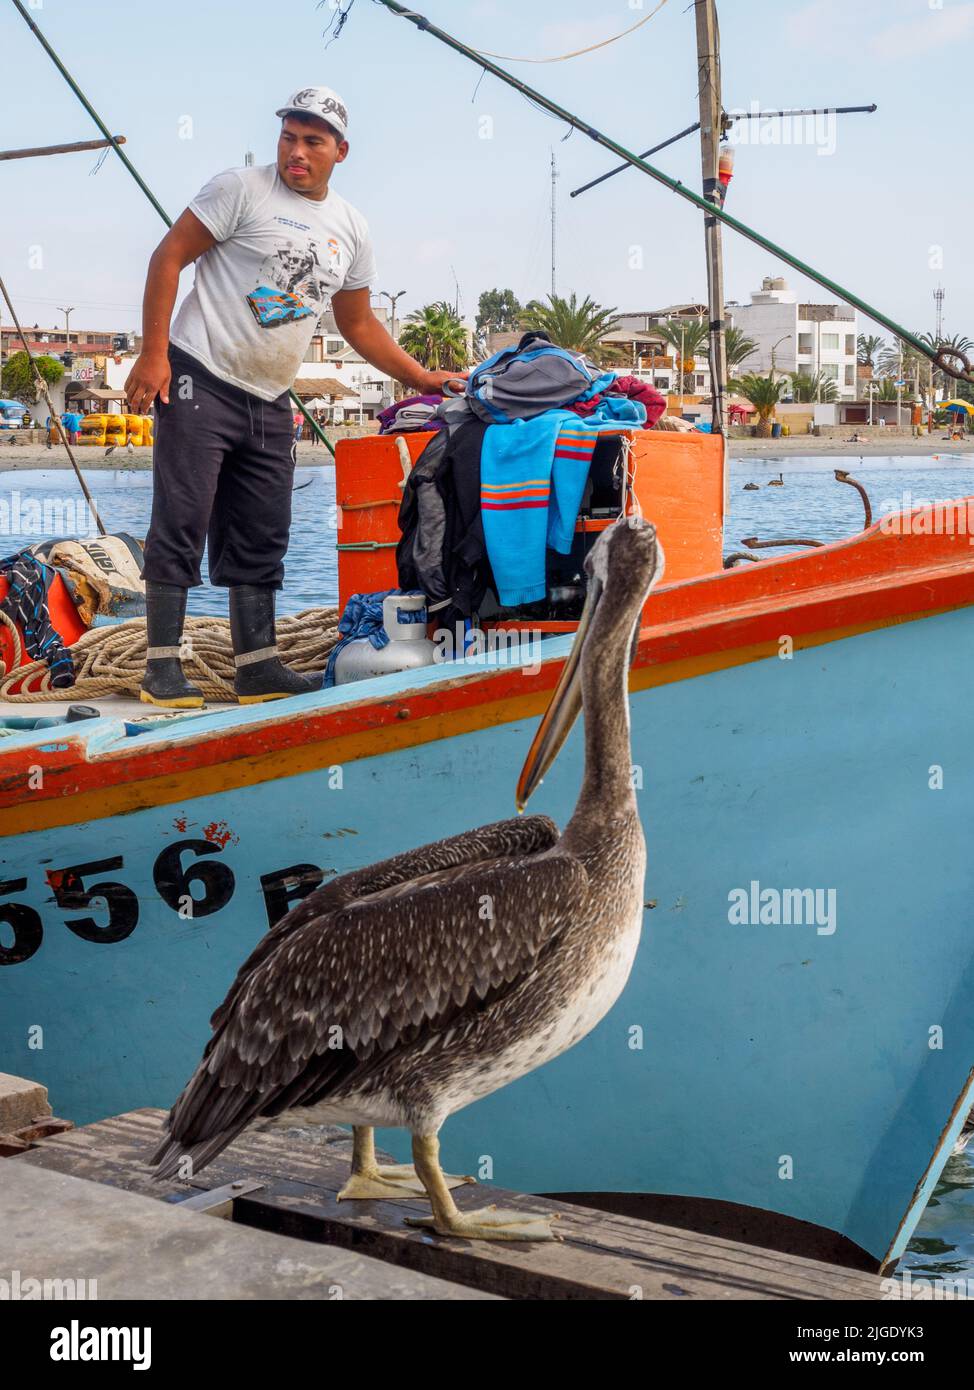 A fisherman and a pelican in the fishing port of Paracas - Peru Stock Photo